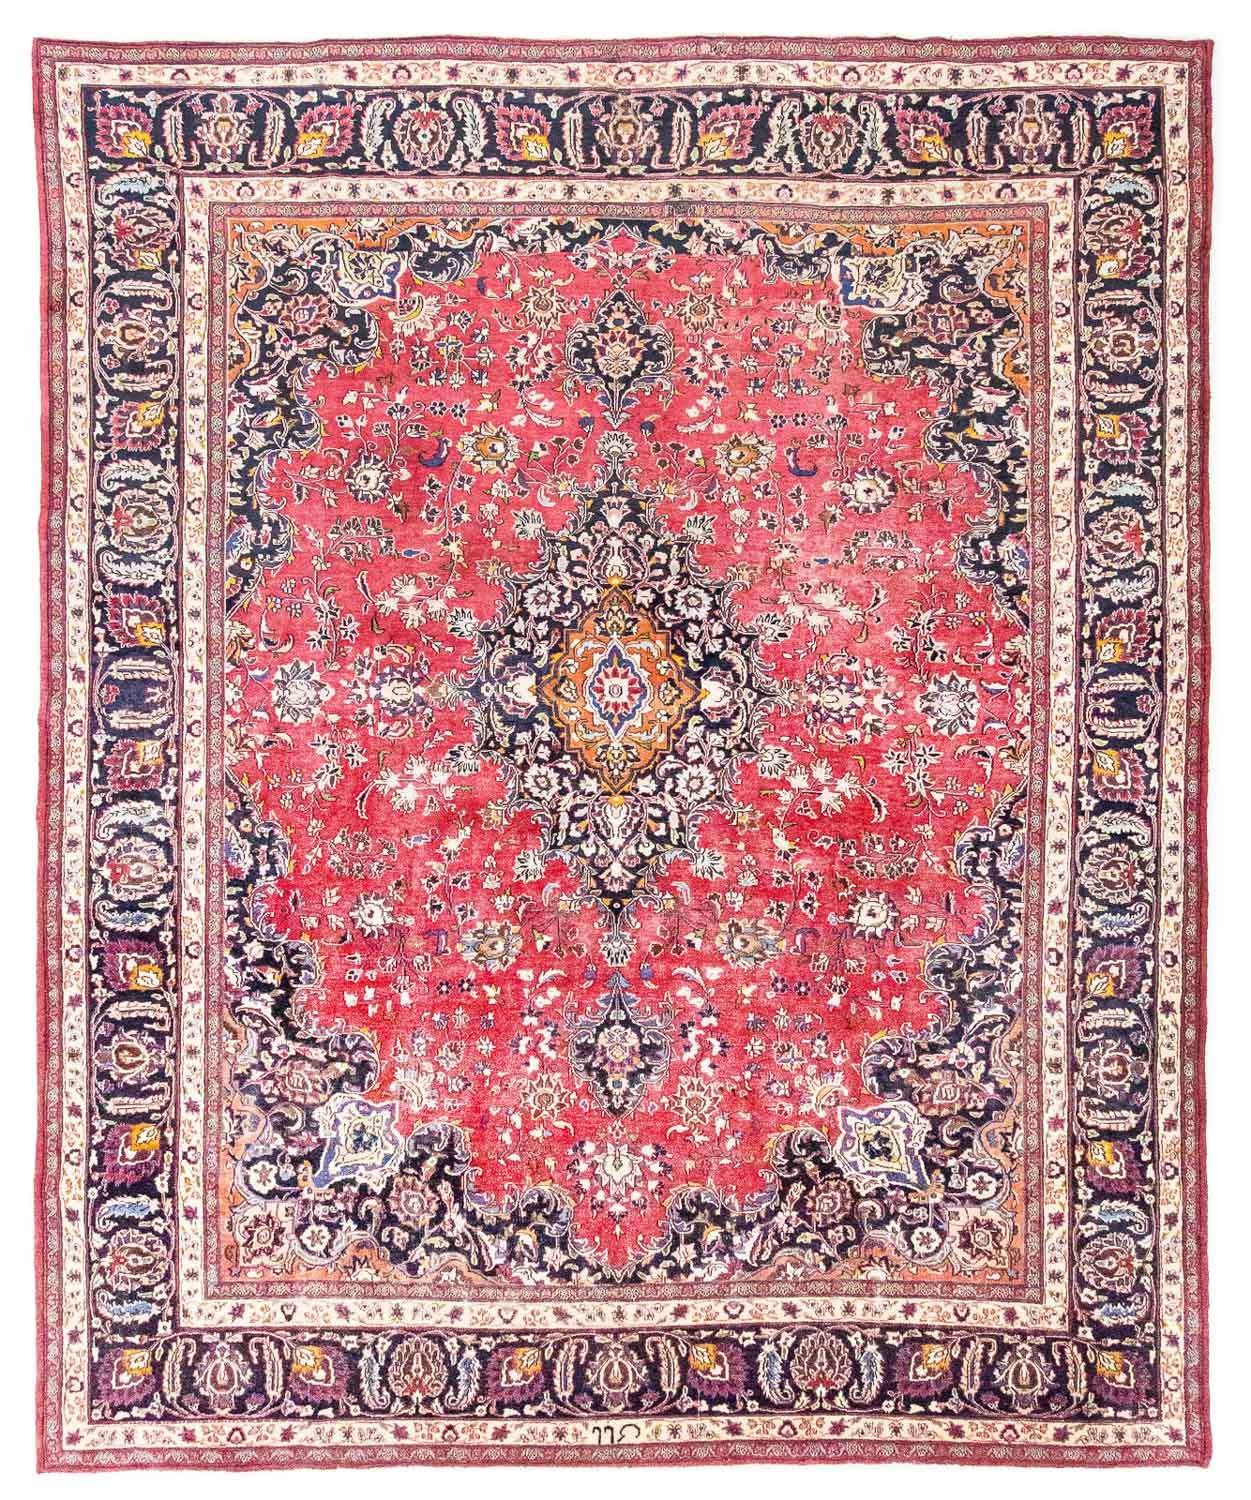 Perser Rug - Classic - 372 x 290 cm - red